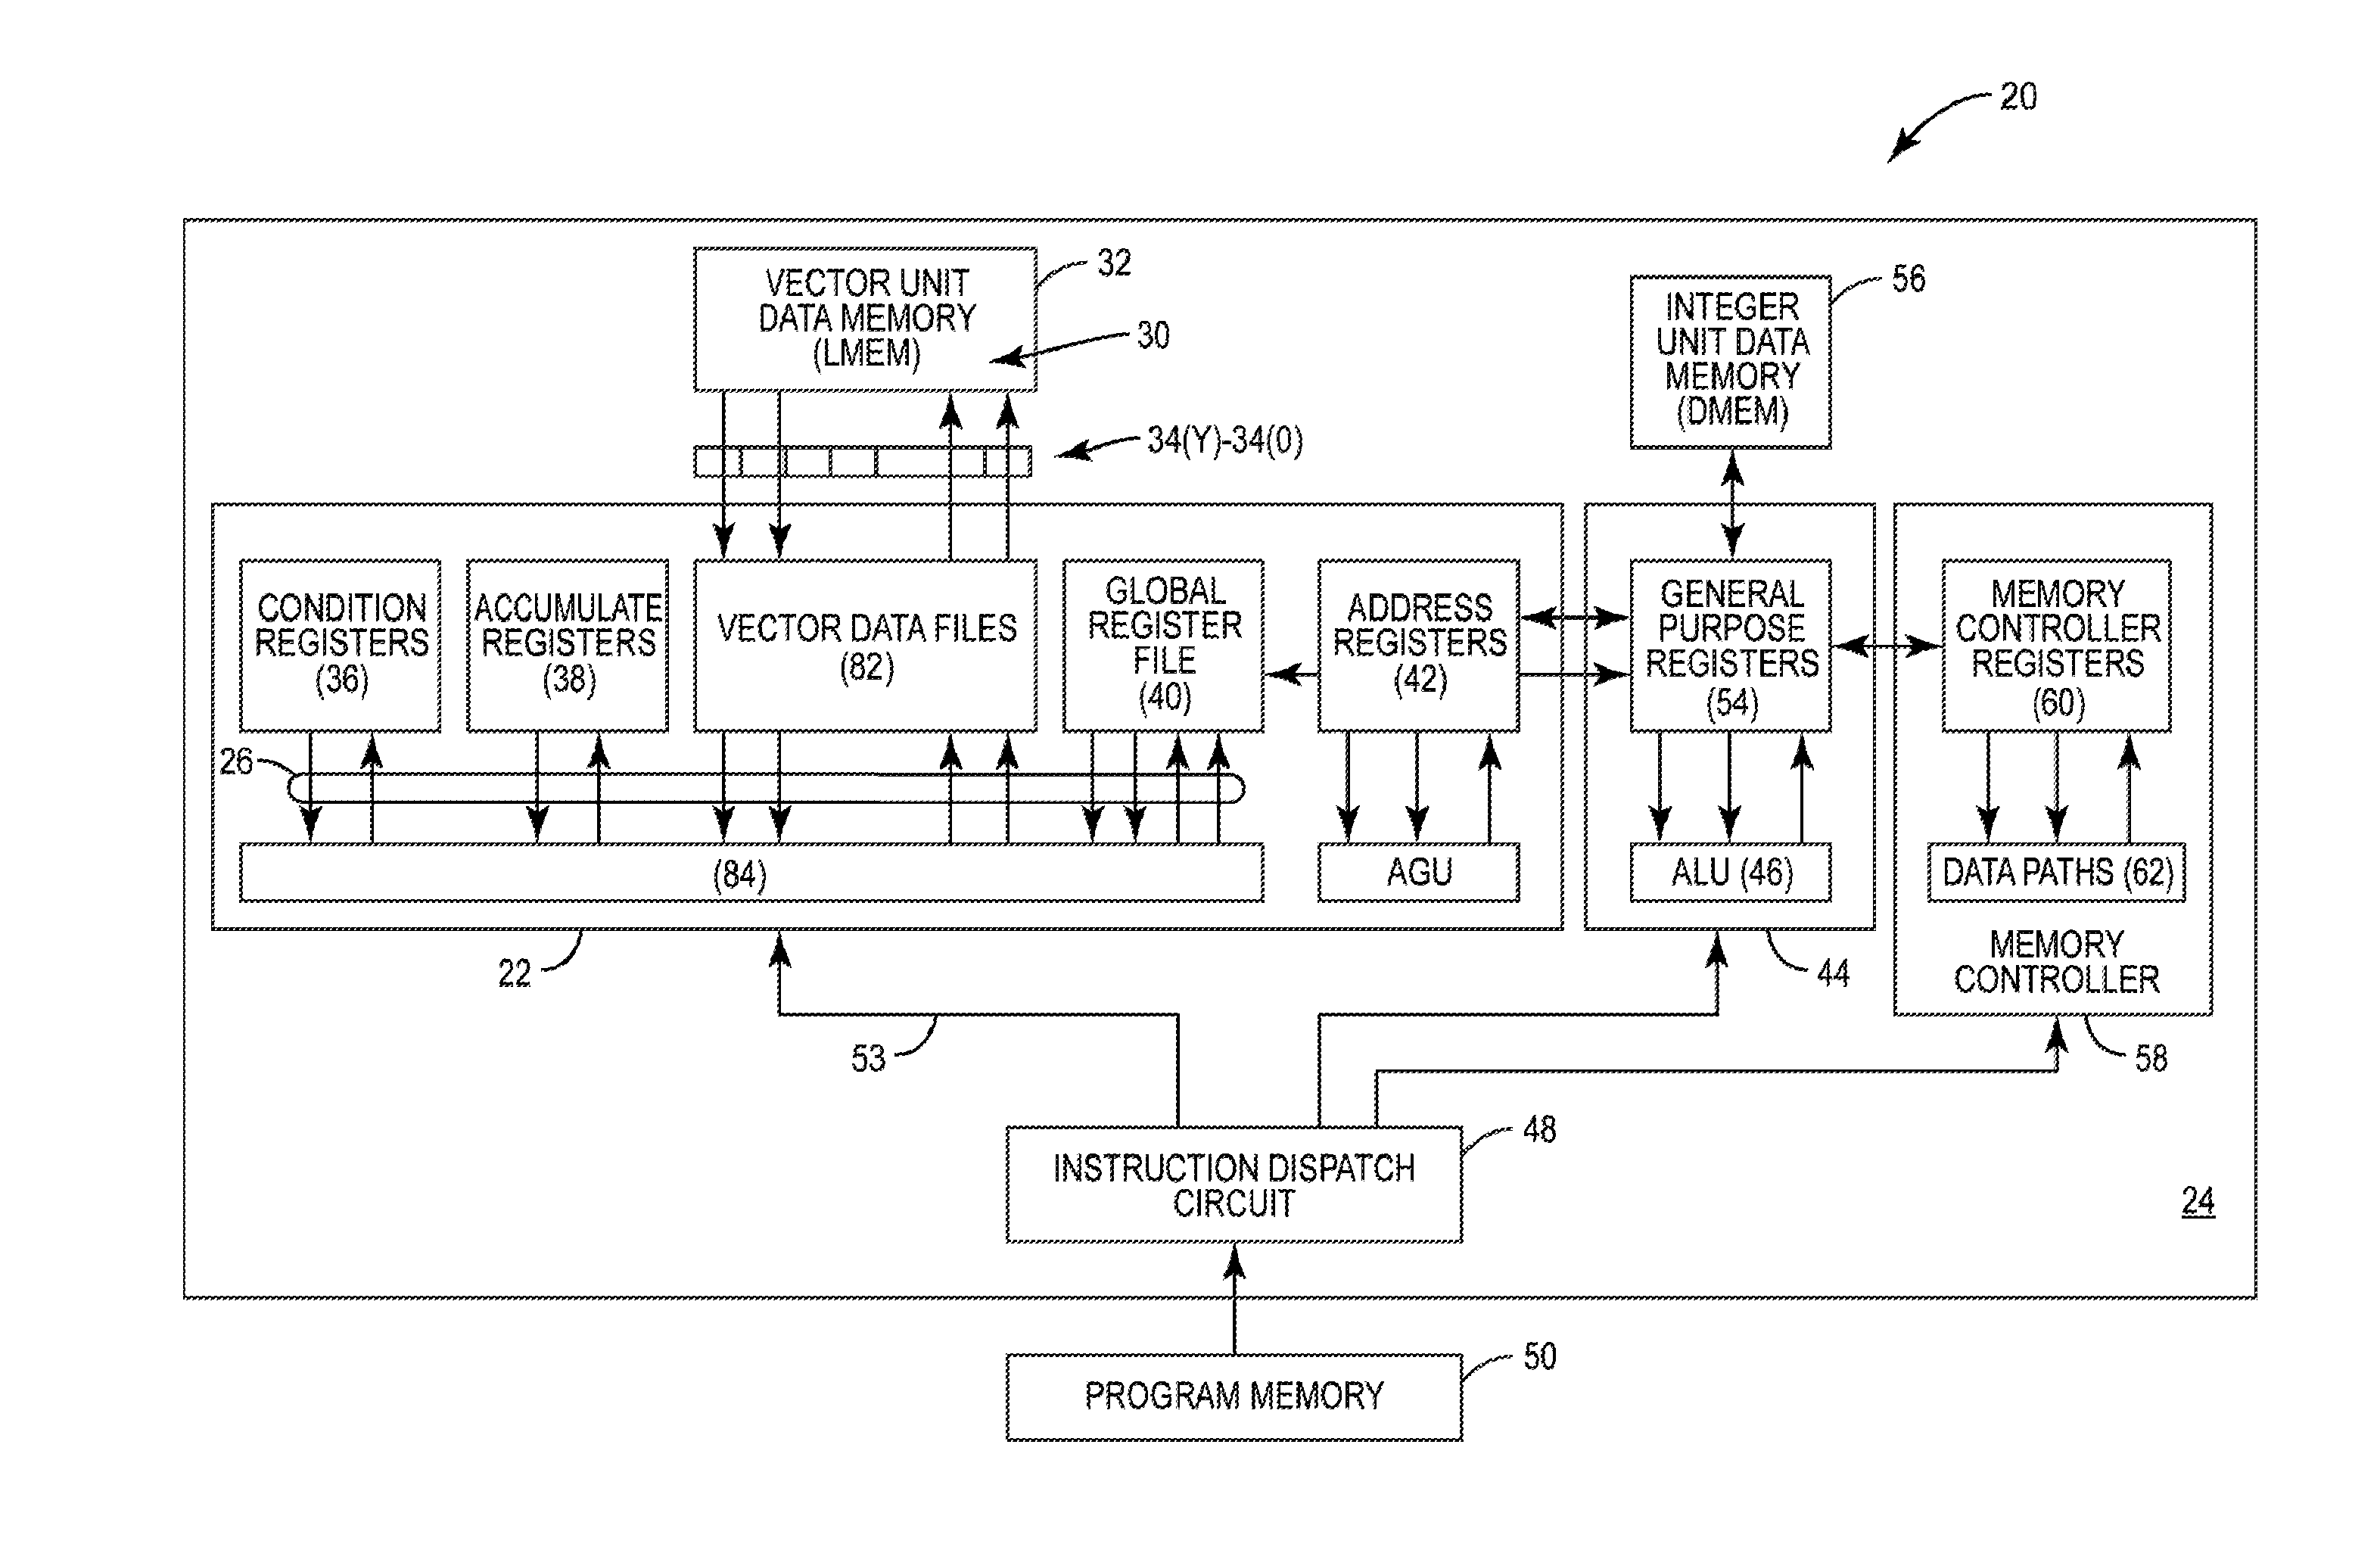 VECTOR PROCESSING ENGINES (VPEs) EMPLOYING A TAPPED-DELAY LINE(S) FOR PROVIDING PRECISION FILTER VECTOR PROCESSING OPERATIONS WITH REDUCED SAMPLE RE-FETCHING AND POWER CONSUMPTION, AND RELATED VECTOR PROCESSOR SYSTEMS AND METHODS